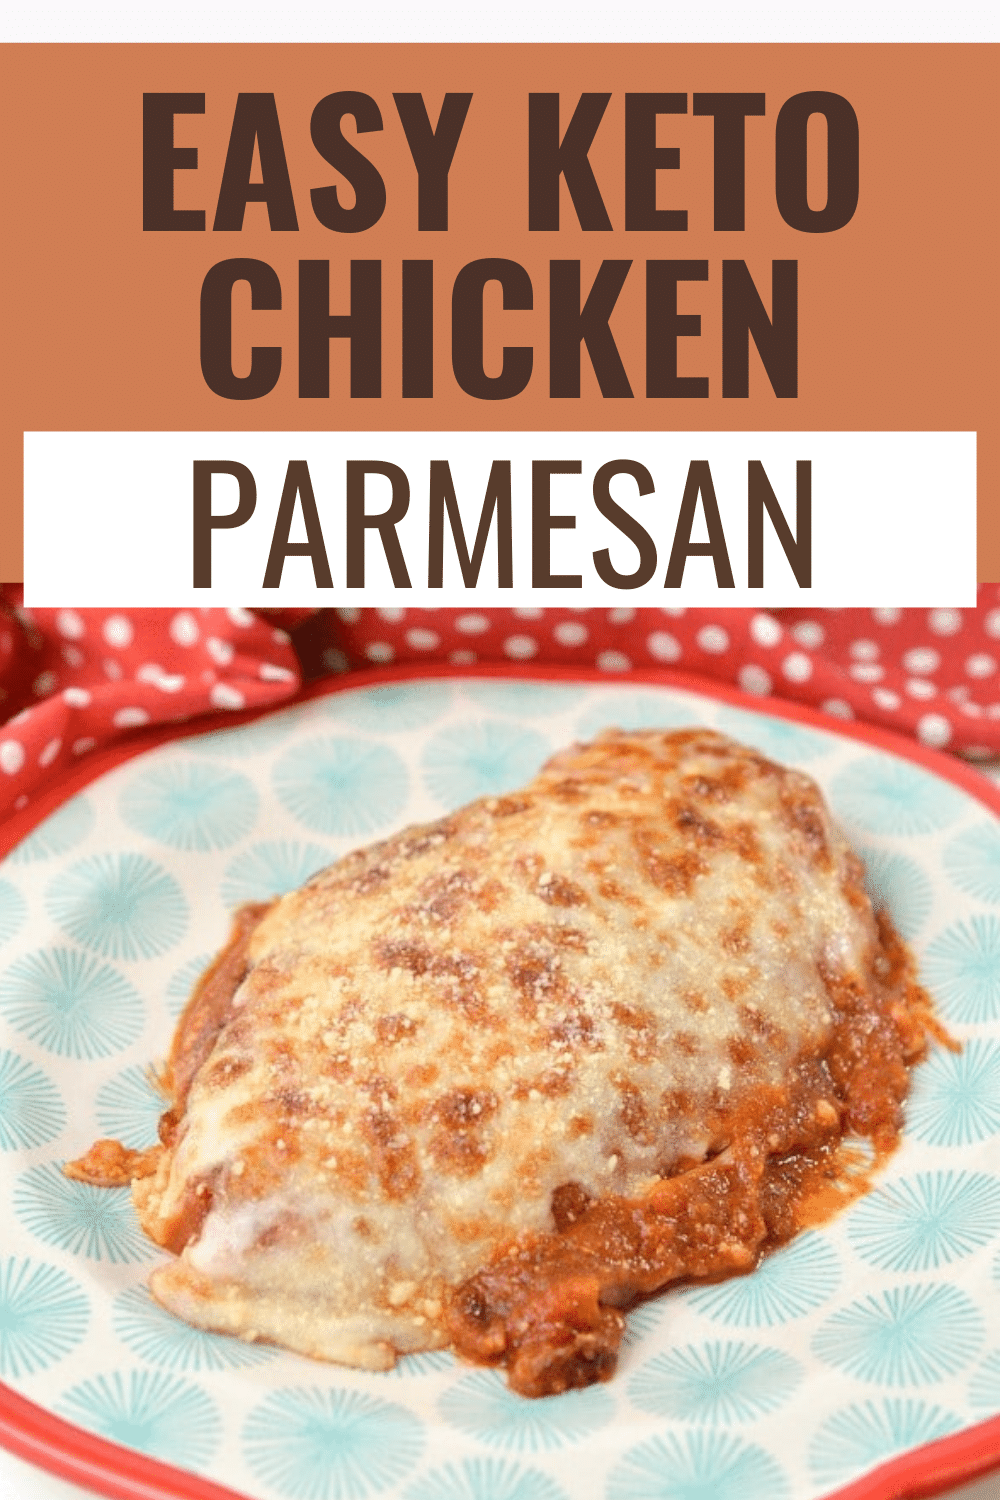 This keto chicken parmesan is delicious! Even better, you can enjoy it without sabotaging your keto diet. #keto #chicken #italian #easydinner via @wondermomwannab